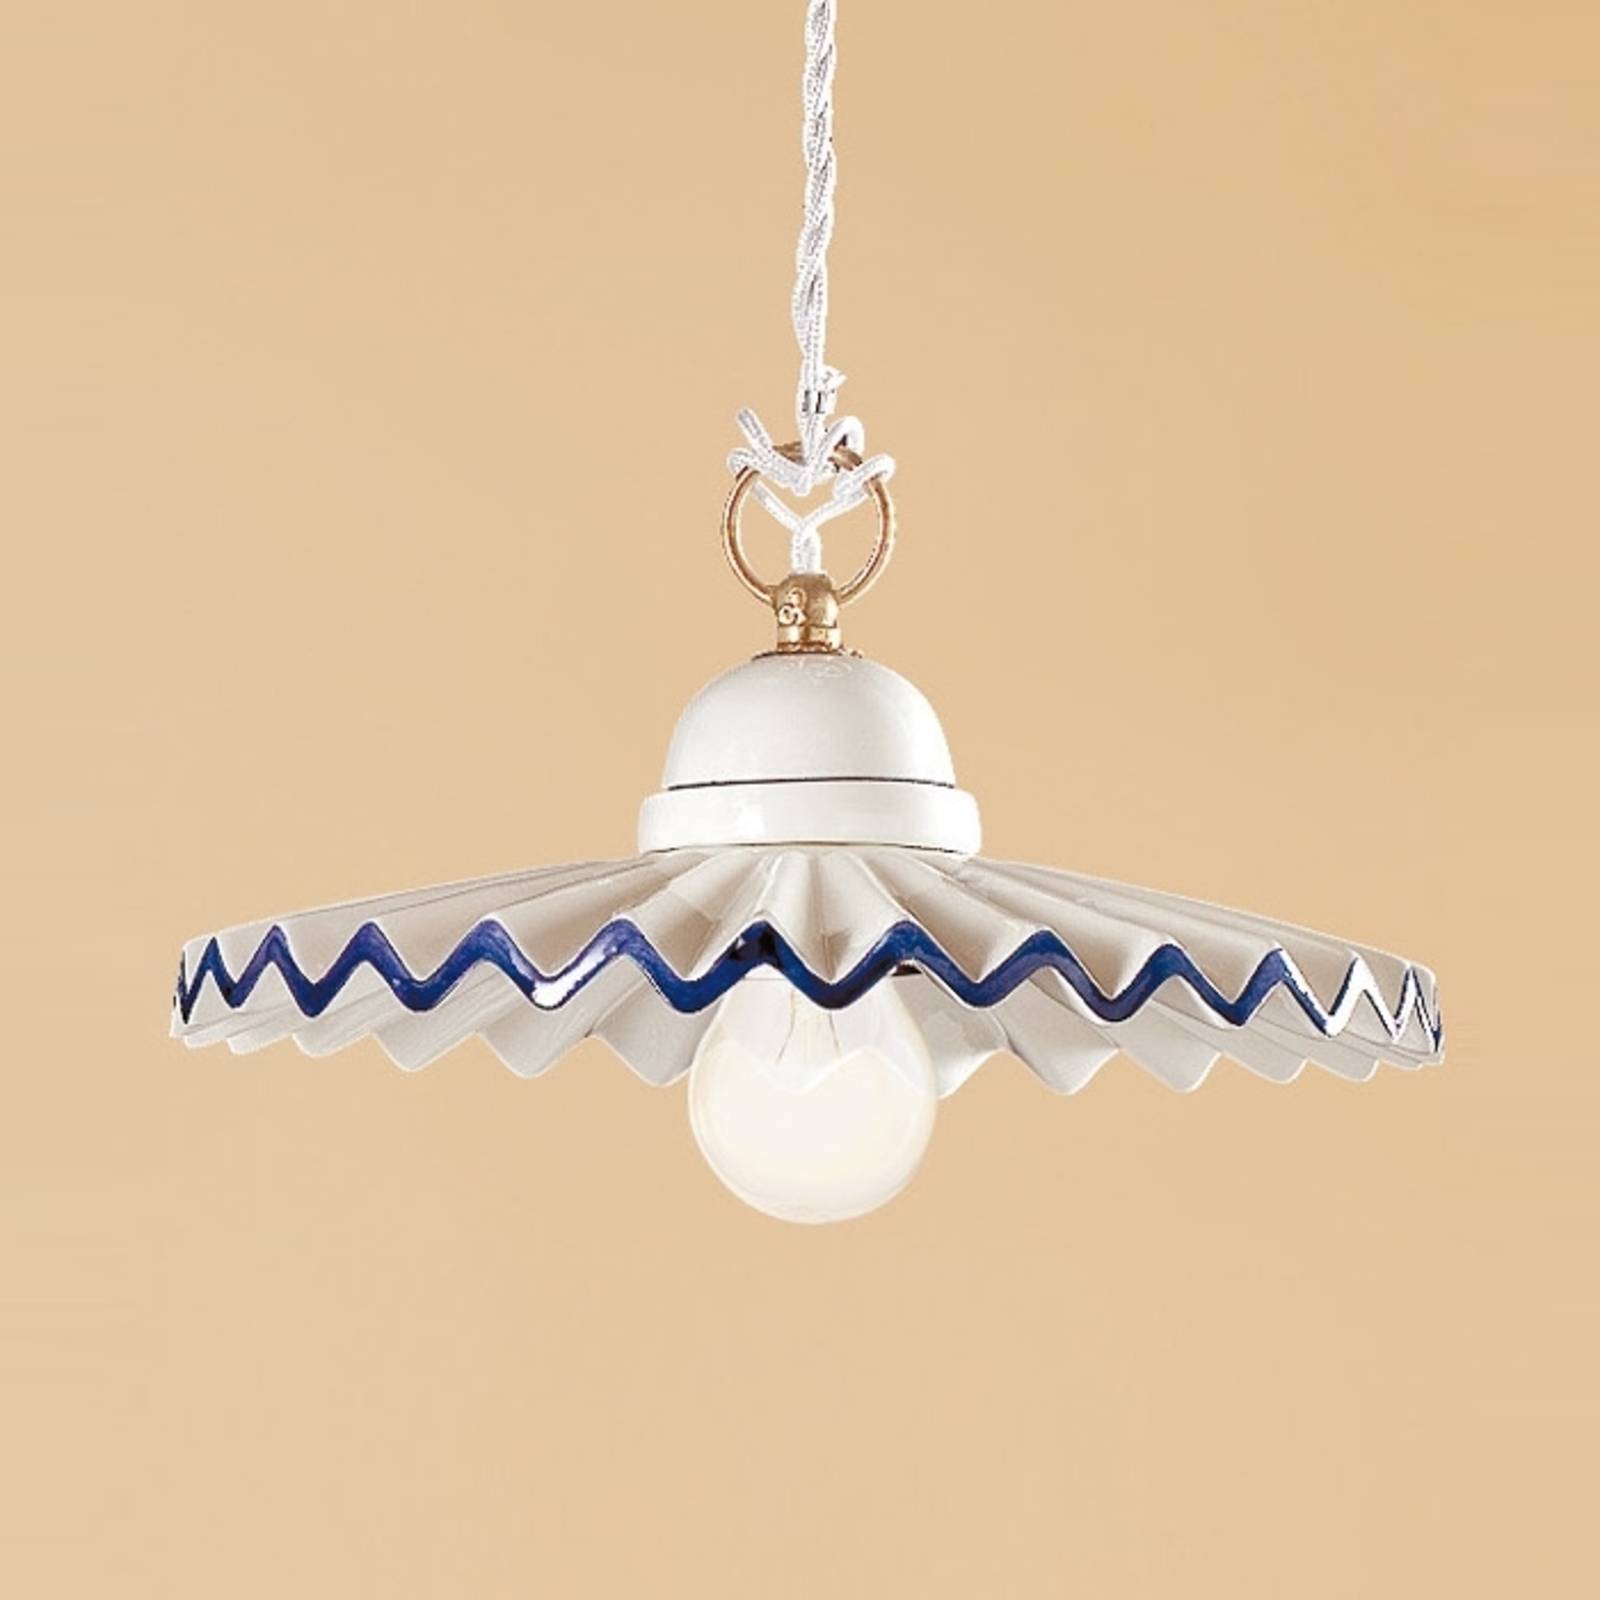 PIEGHE pendant light, country house style, 28 cm